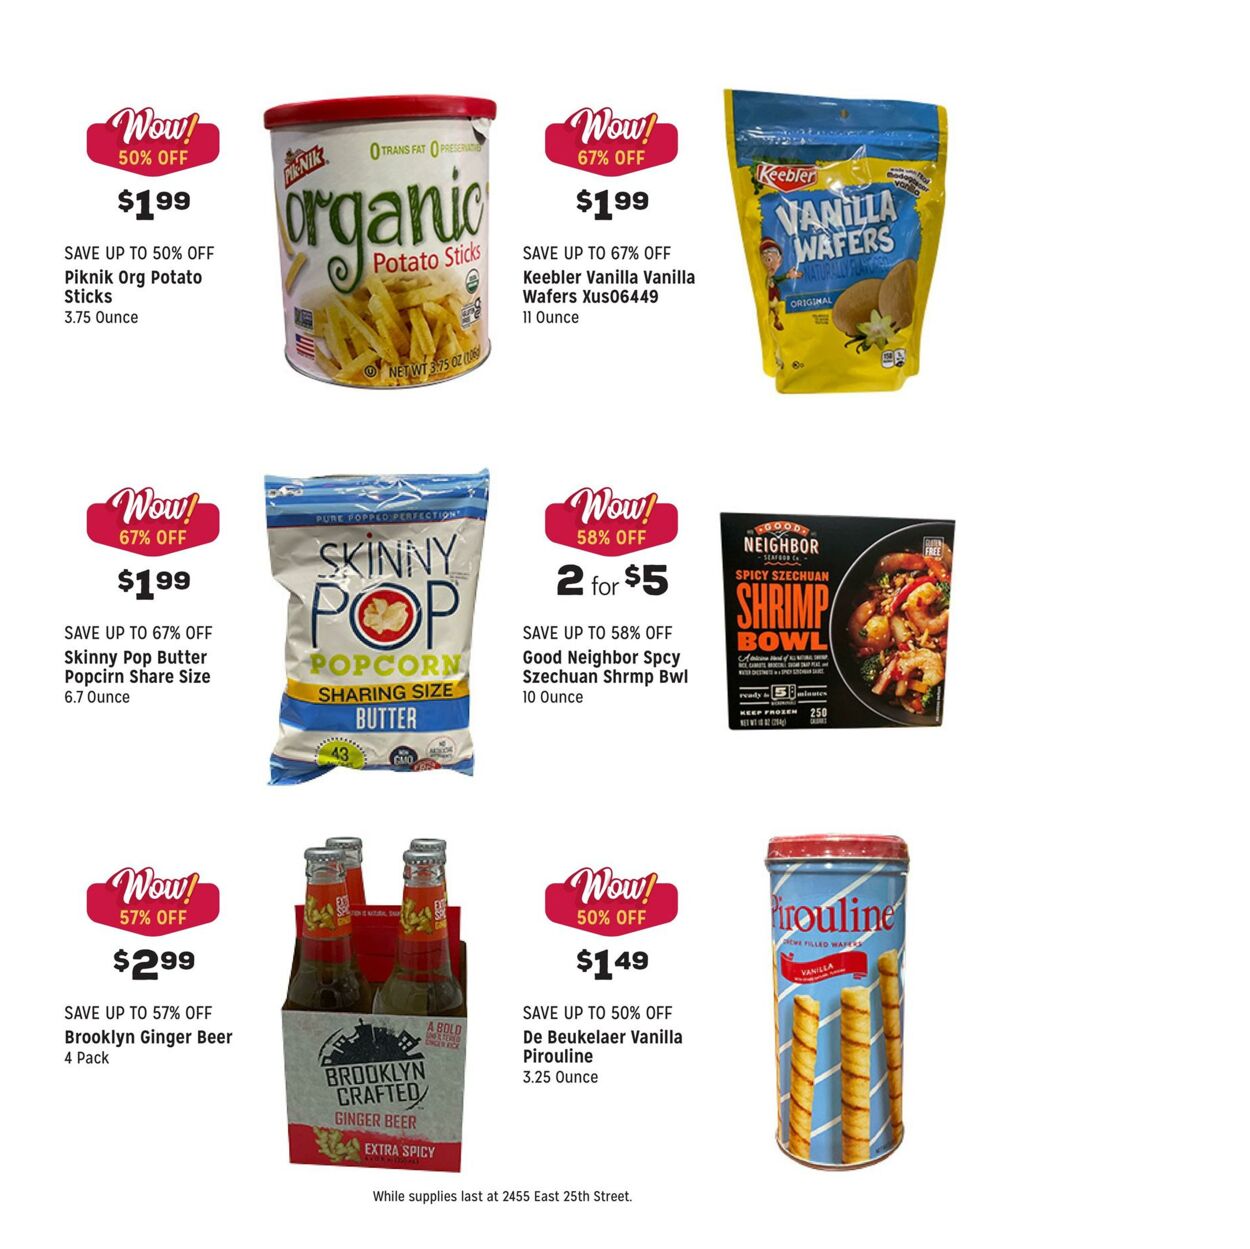 Weekly ad Grocery Outlet 06/28/2023 - 07/04/2023